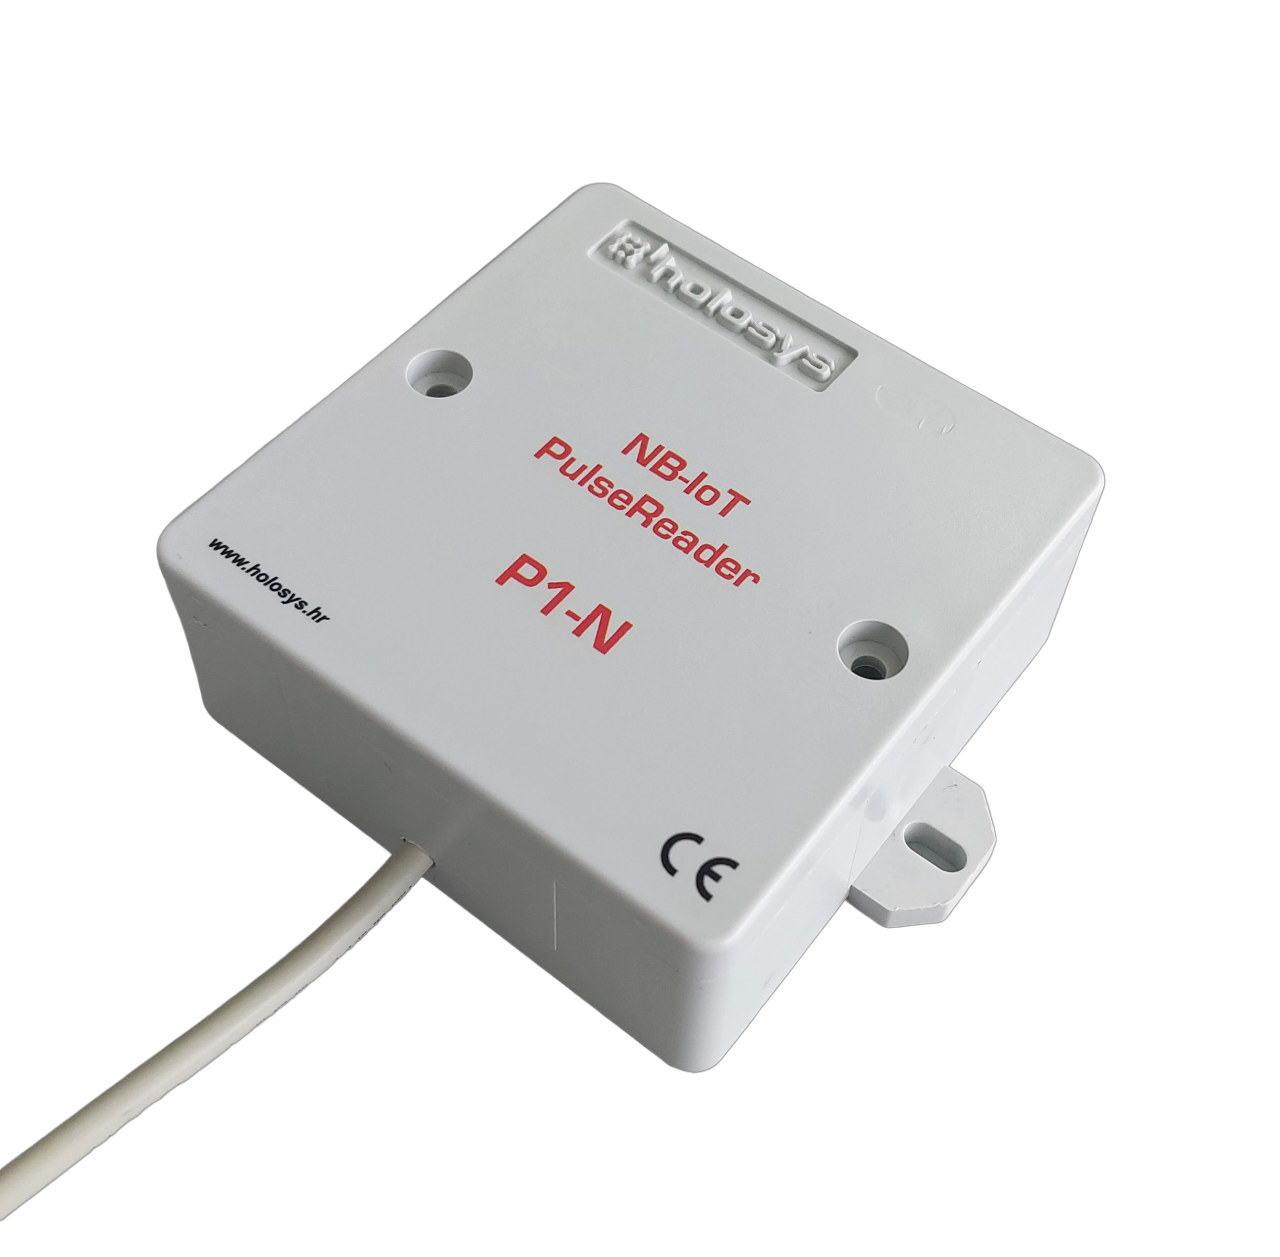 Holosys NB-IoT PulseReader P1-N is a module used for automated reading of meter consumption from uti